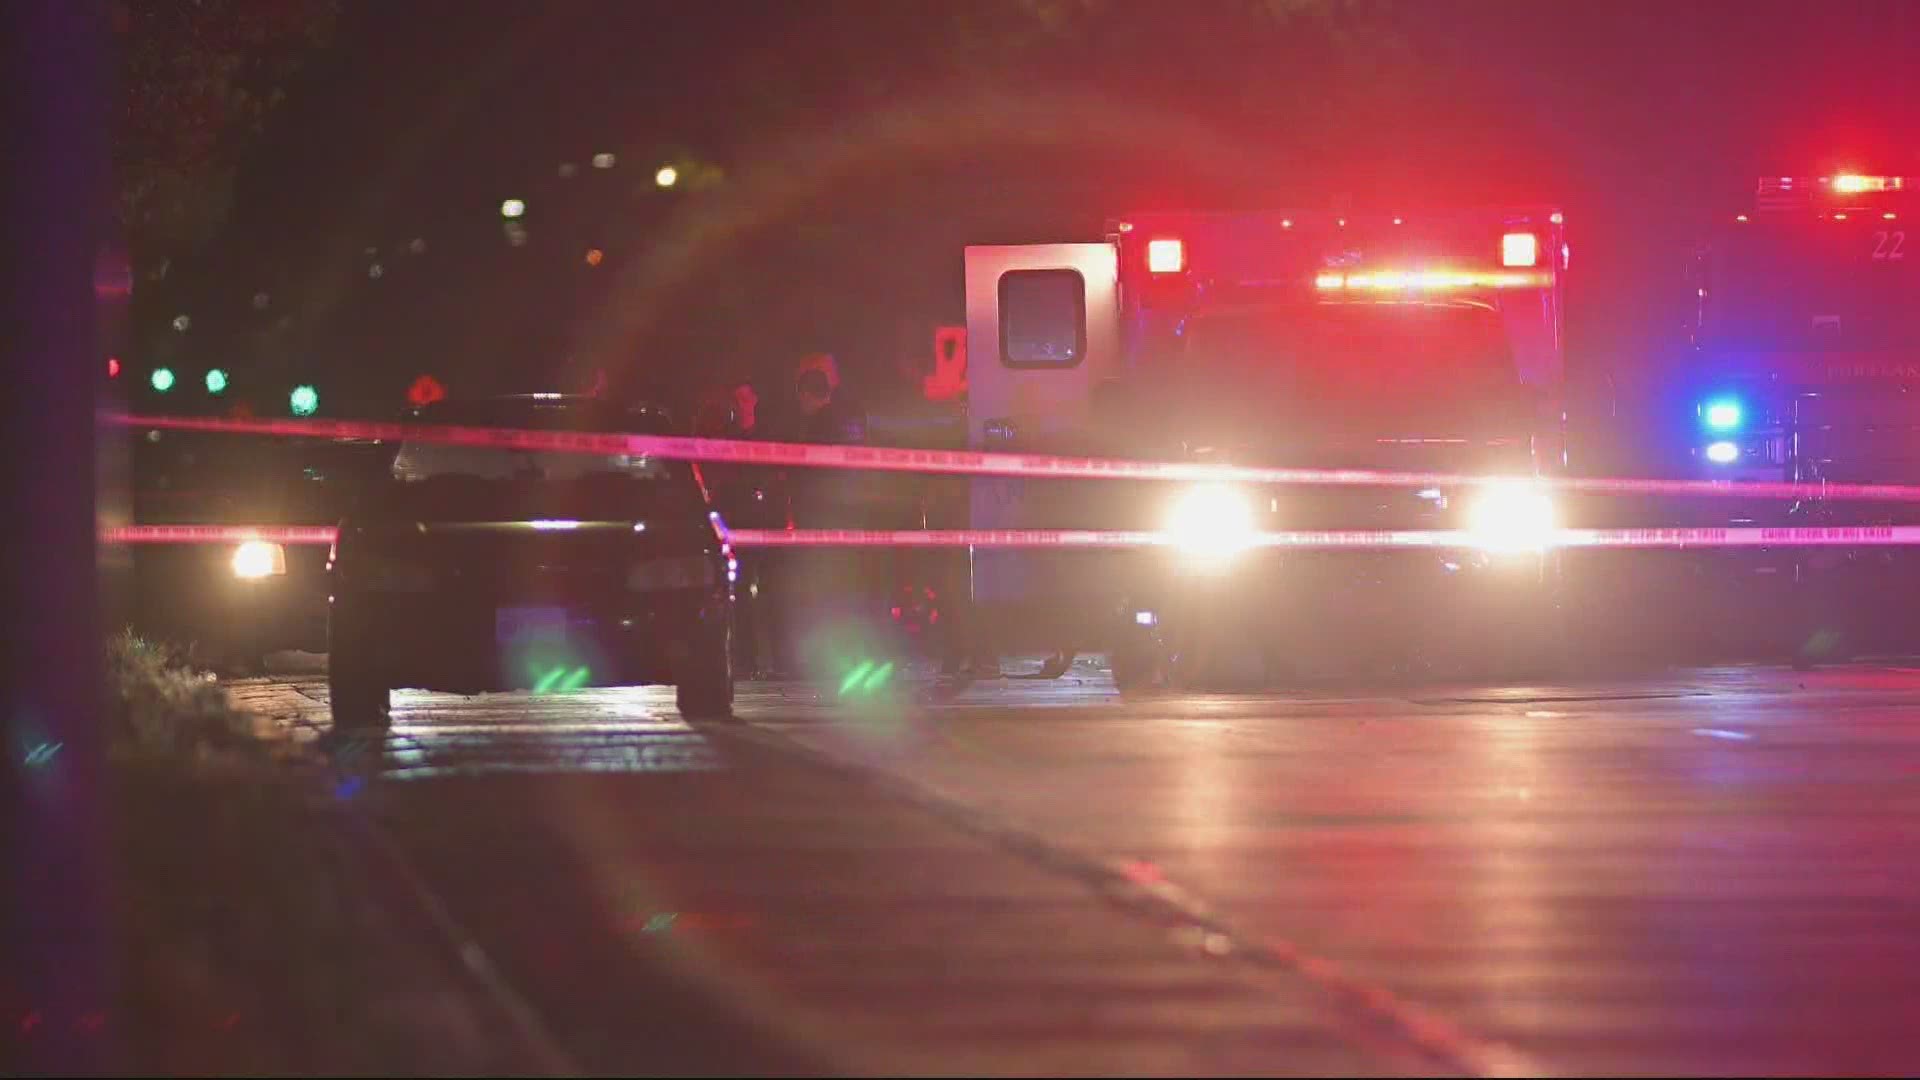 The fatal crash happened just after midnight Monday on Marine Drive in Portland. Police say there were around 350 people in the area for an illegal street race.